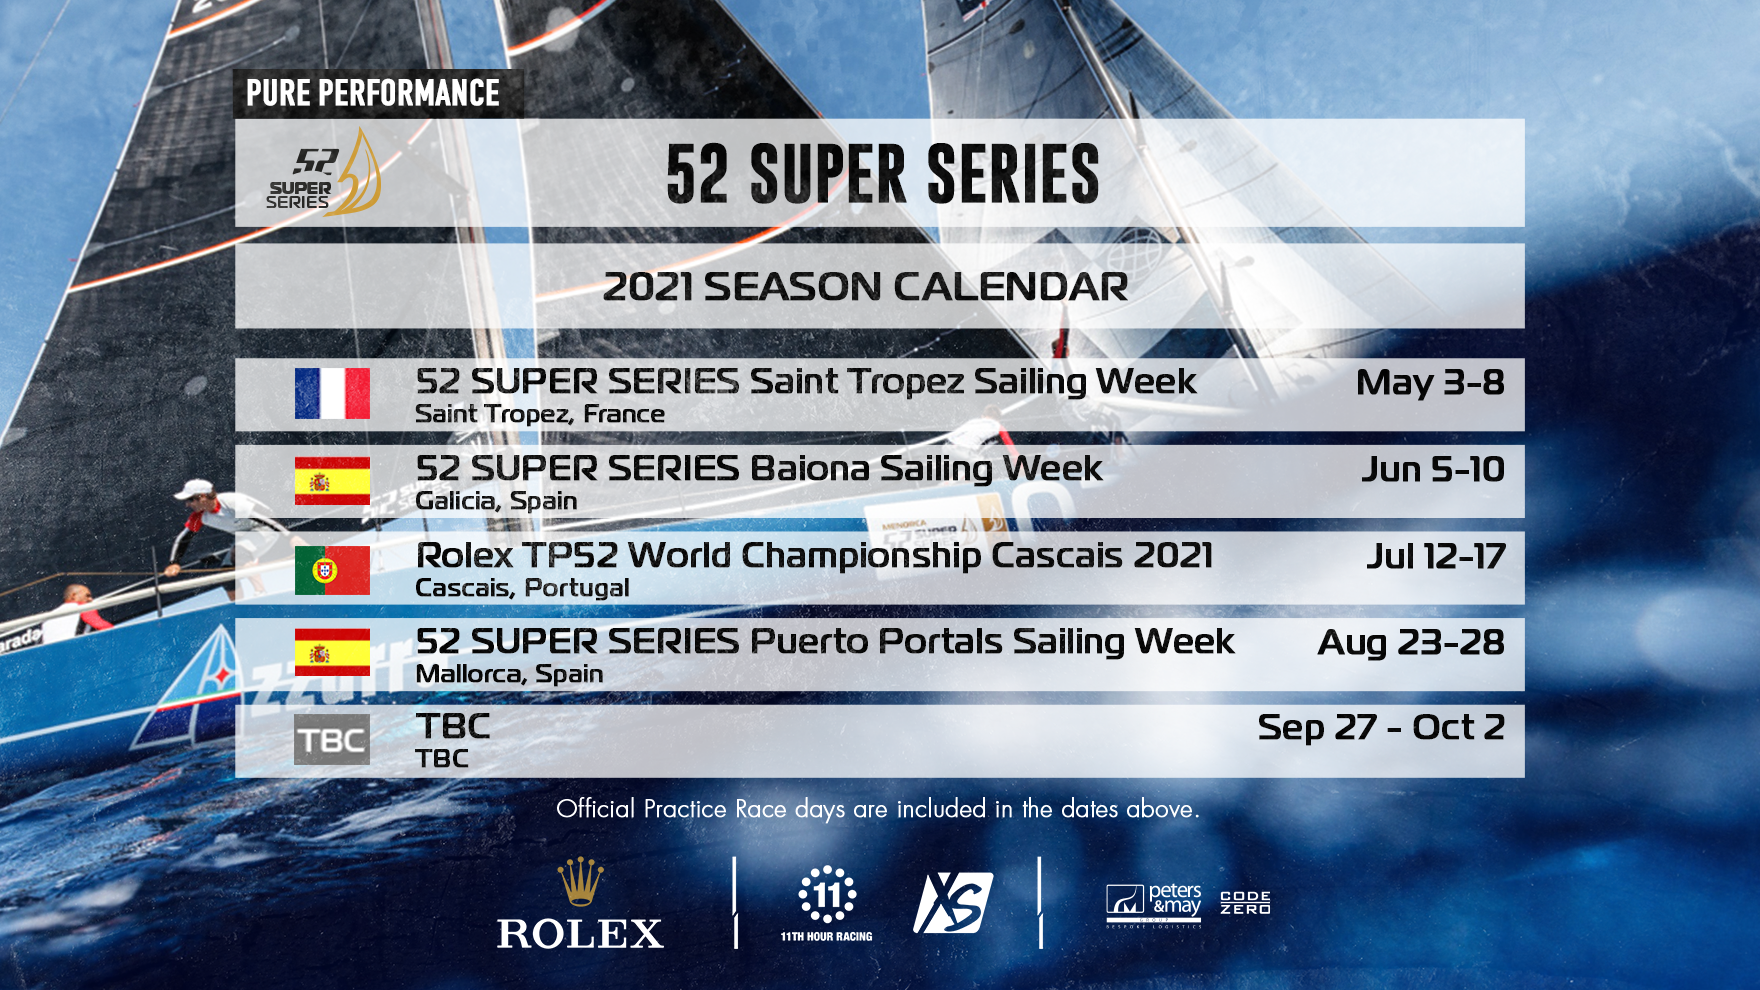 Galicia and Saint Tropez are new venues on the 52 Super Series 2021